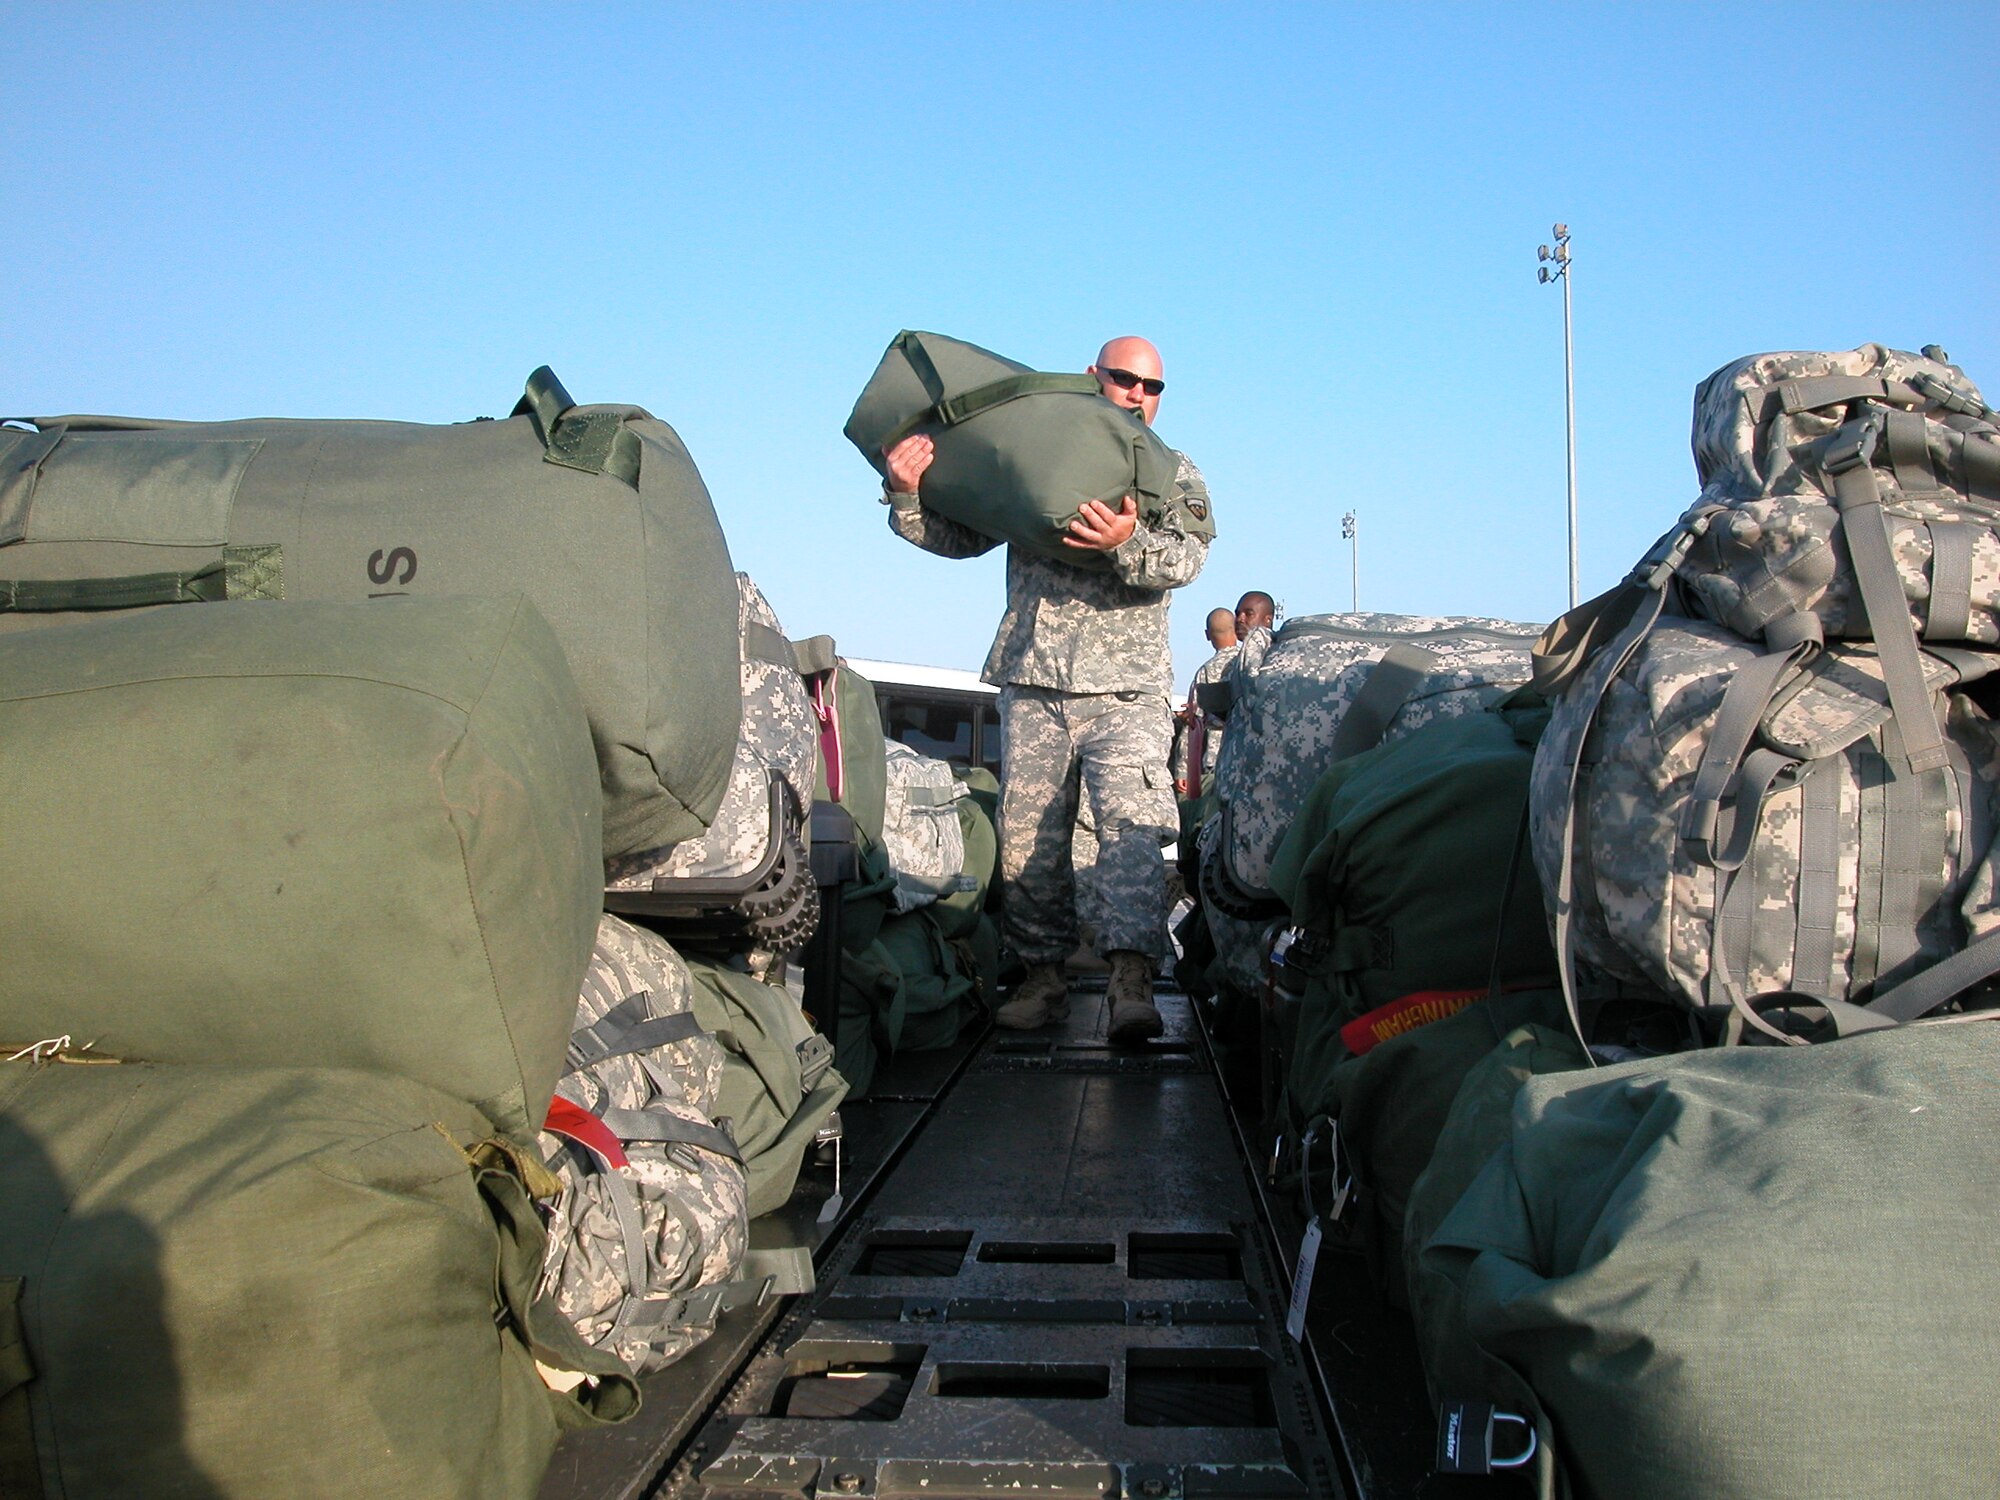 Master Sgt. Collin Carlson helps load one of the many duffle bags.Members of the Army National Guard’s 304th Sustainment Brigade load equipment on a K-loader to prepare for their unit’s deployment to Iraq. In all, they loaded about 36,500 pounds of cargo and personal equipment. After leaving March ARB, they flew to Fort Bliss, Texas where they will train for six weeks before heading to Iraq. According to 452 APSF, 34,000 people (approximately 22 million pounds) and about 56 million pounds of cargo are processed from March ARB each year. (U.S. Air Force photo by Staff. Sgt. Joe Davidson)